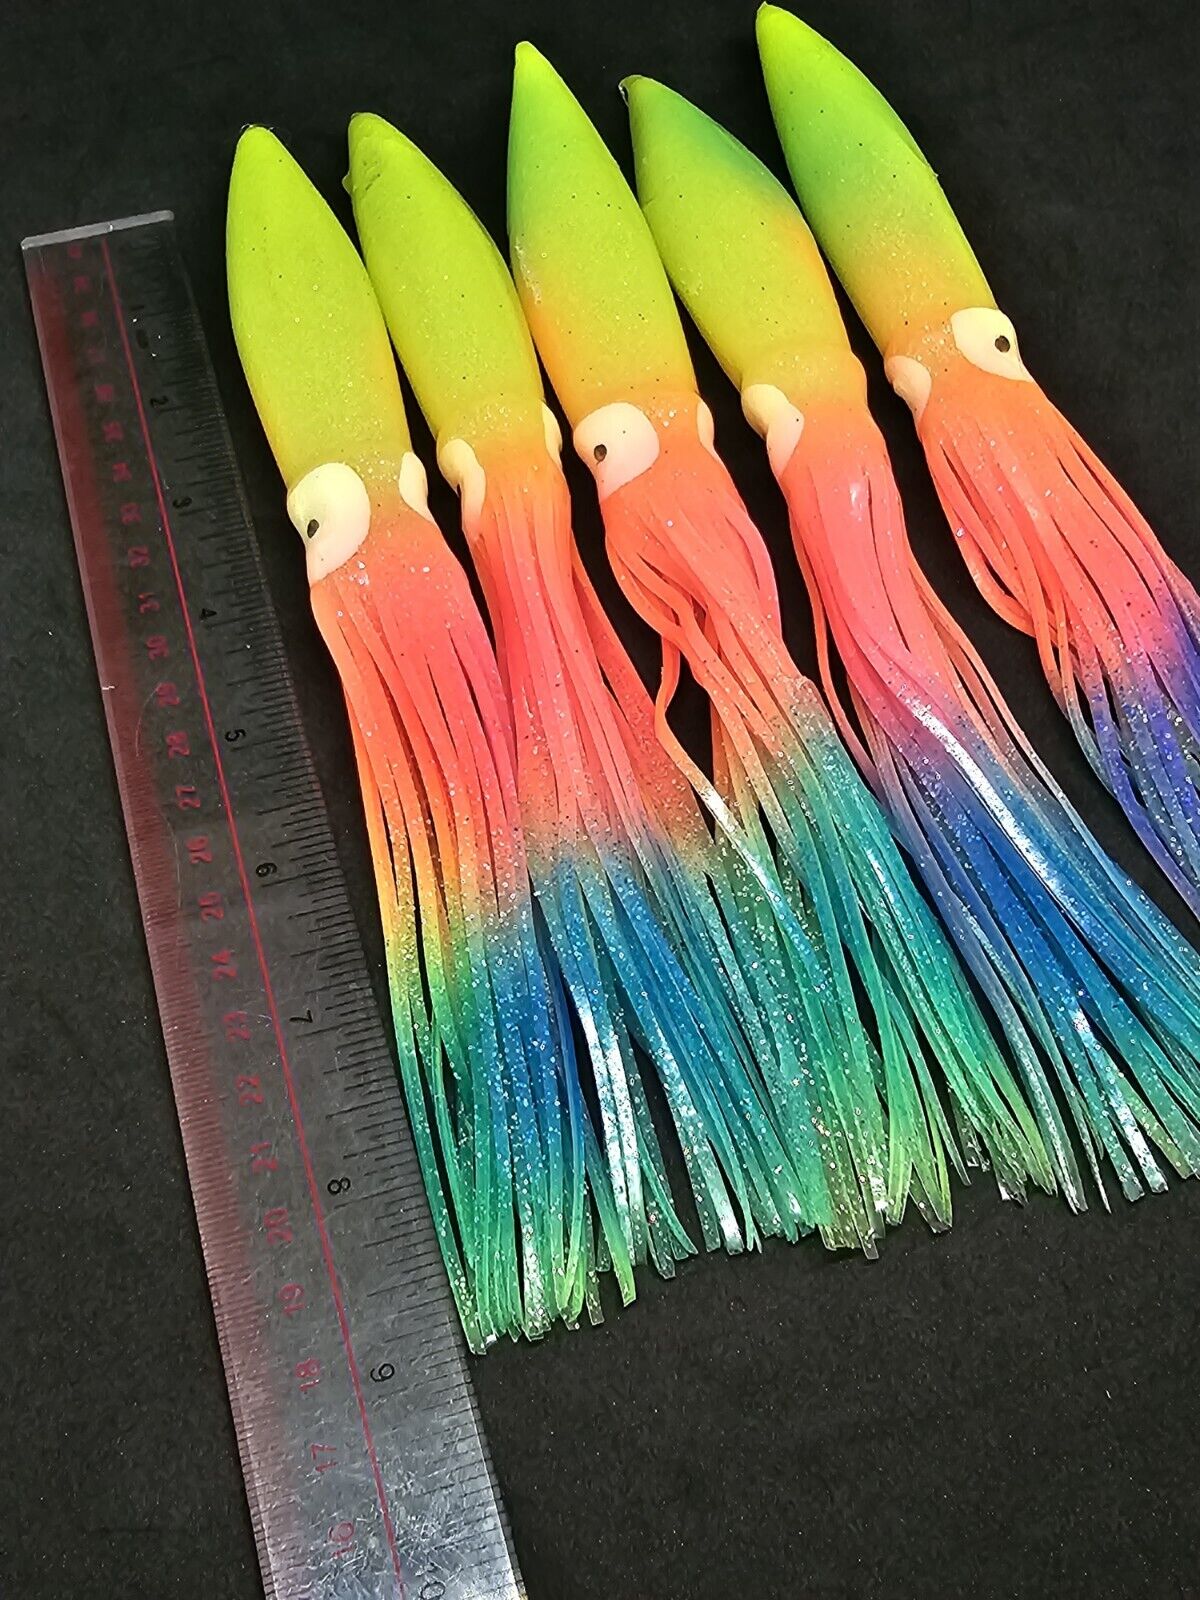 2 Pack of 10 Inch Marlin Lure and trolling Lure Squid Skirts (Includes 2  Skirts)